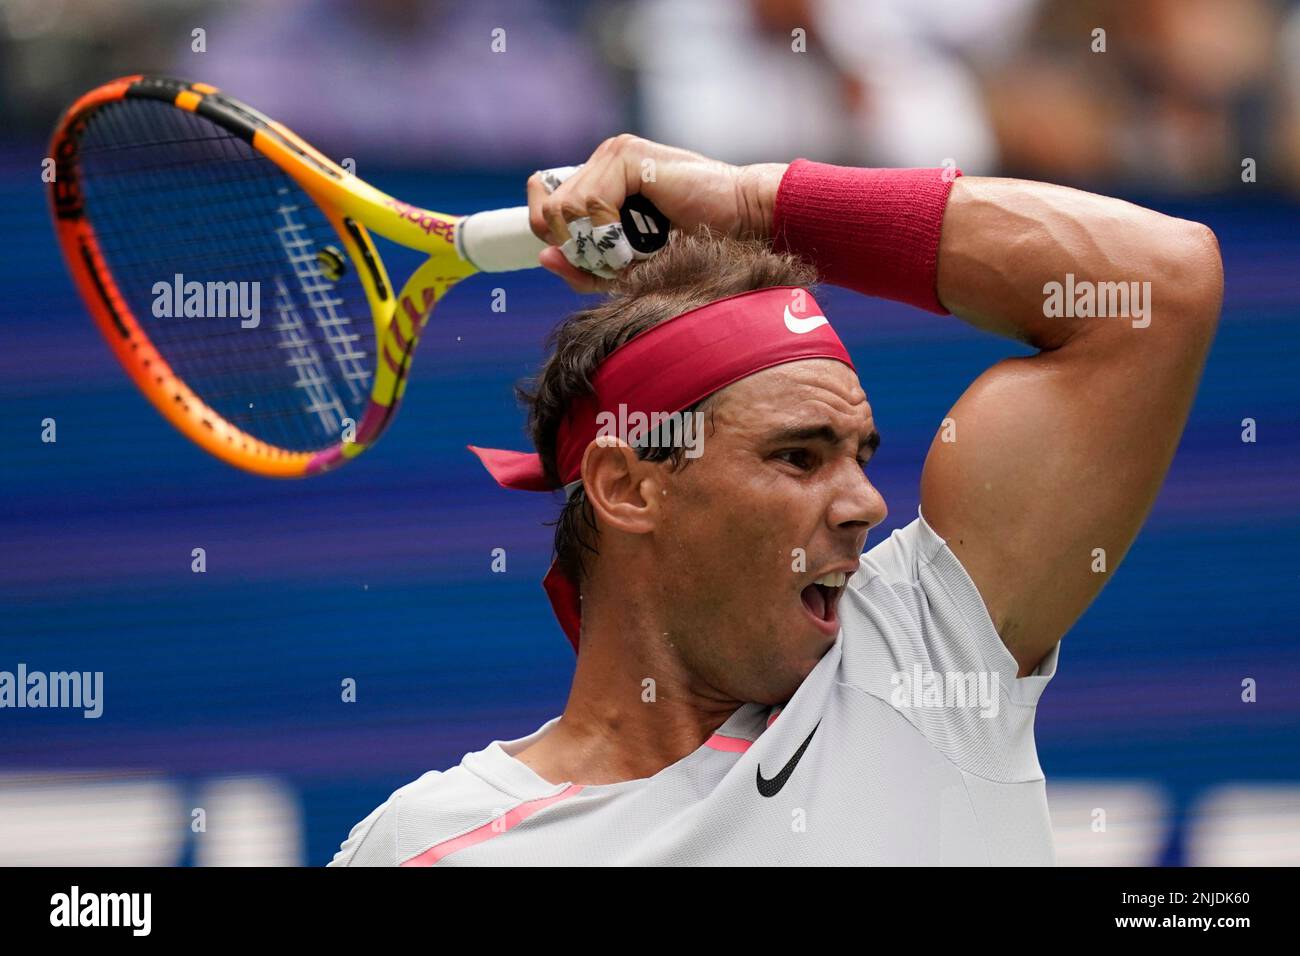 Rafael Nadal, of Spain, returns to Frances Tiafoe, of the United States, during the fourth round of the U.S. Open tennis championships, Monday, Sept